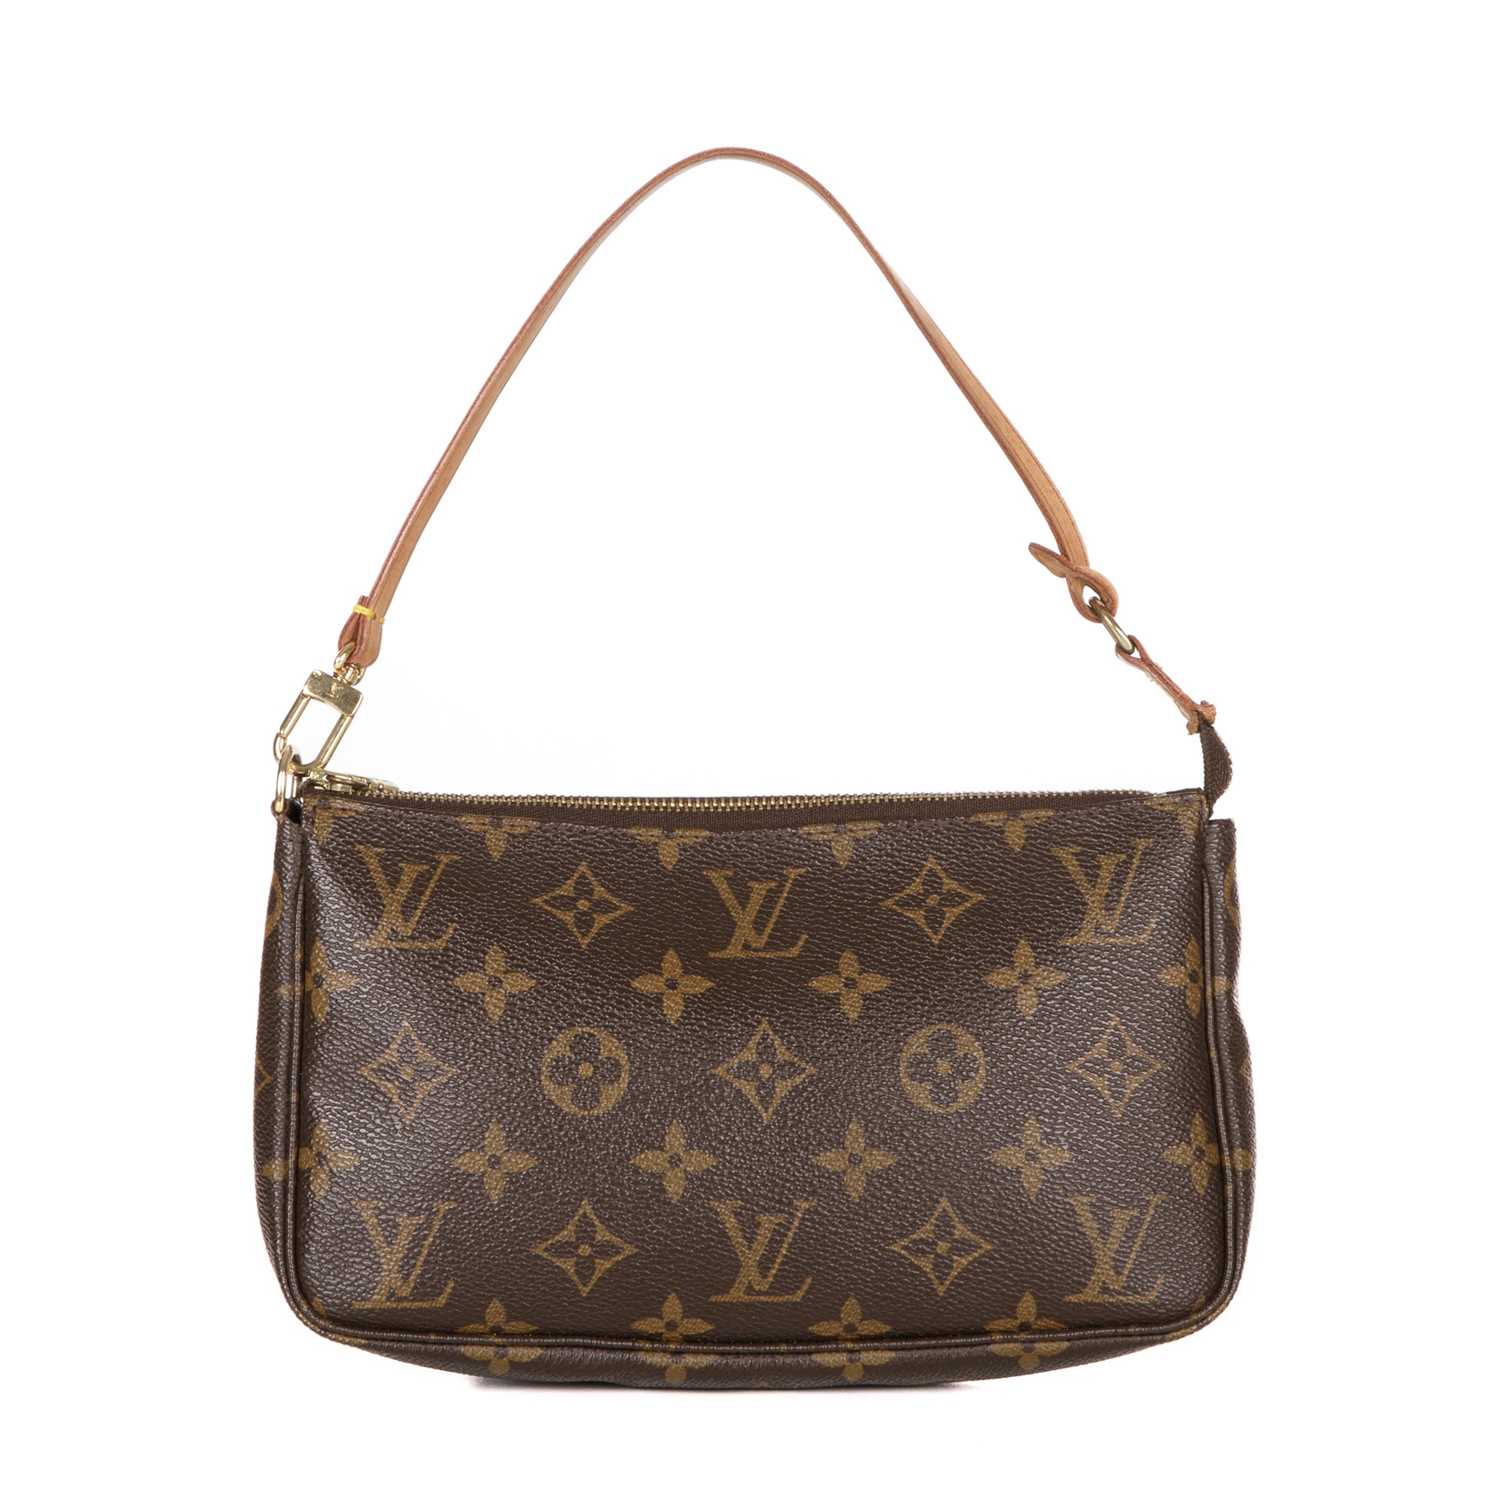 Louis Vuitton, a monogram Pochette Accessoires handbag, crafted from the maker's classic monogram - Image 2 of 3